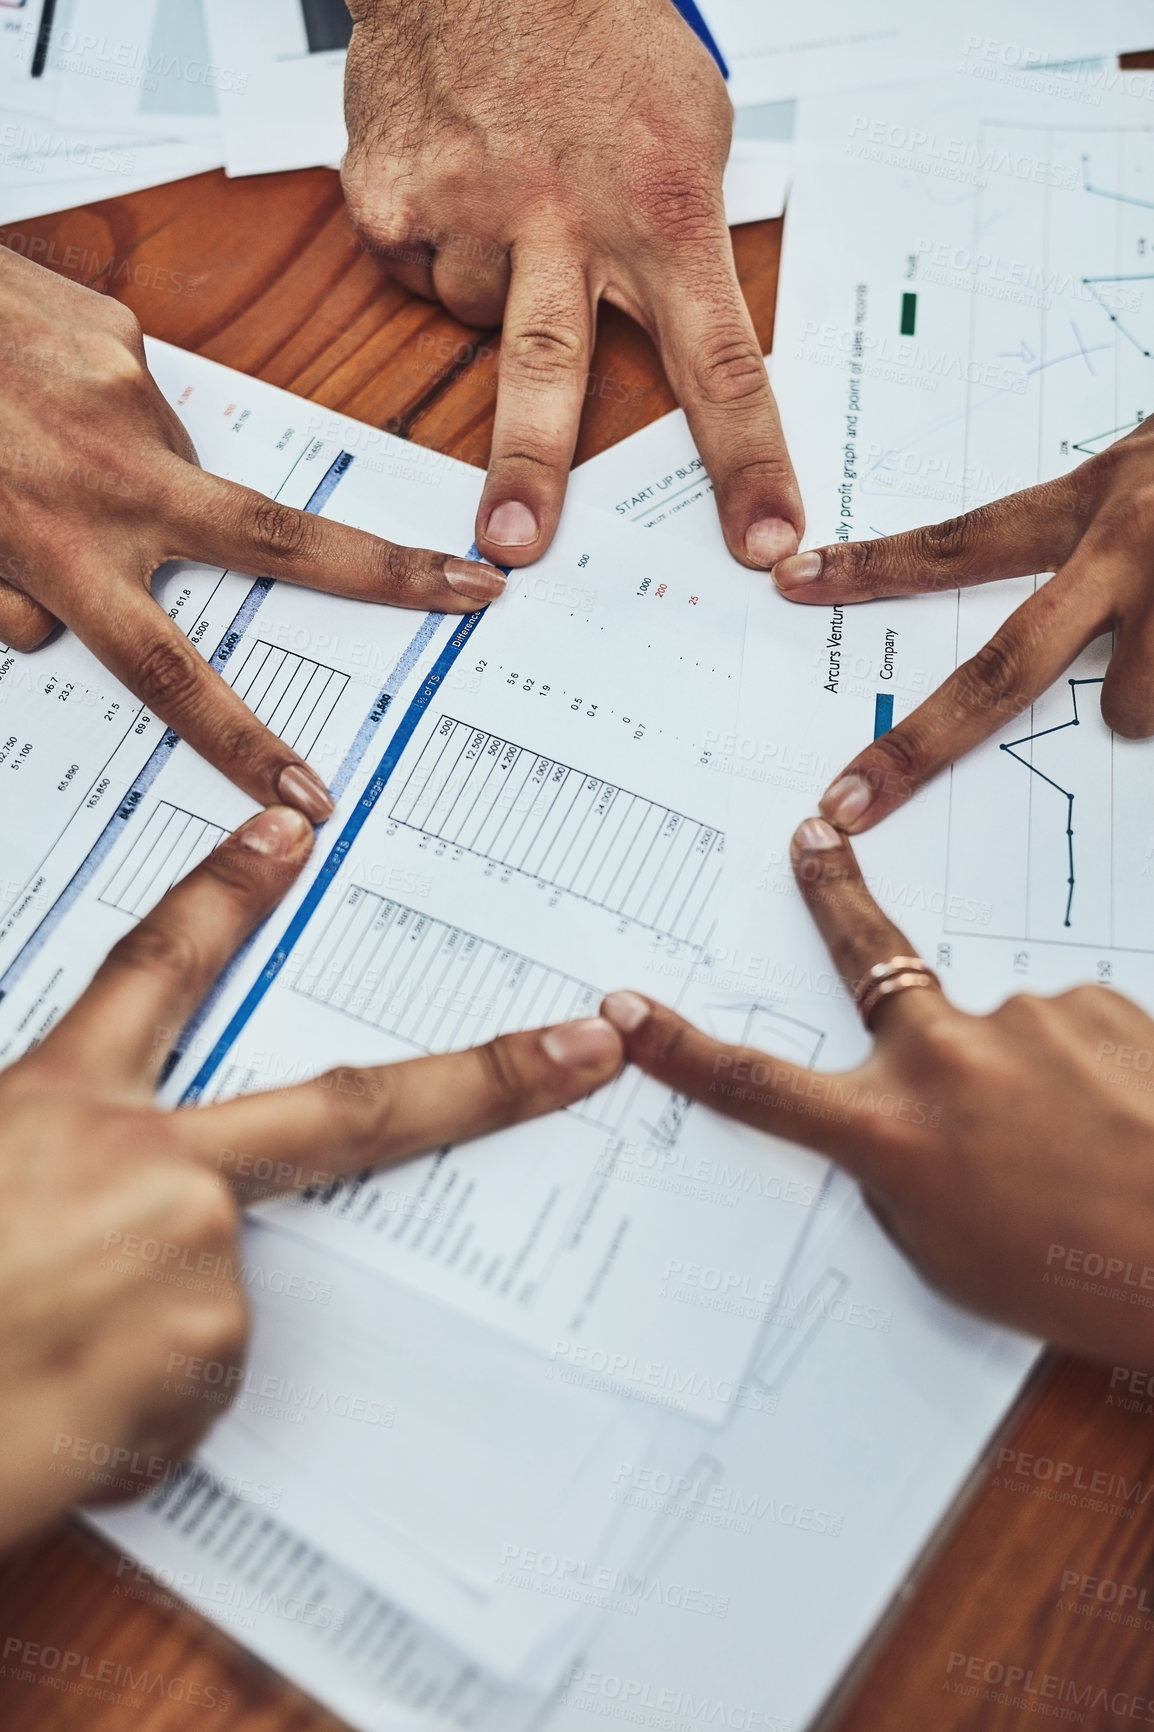 Buy stock photo Closeup shot of an unrecognizable group of businesspeople joining their fingers together in an office